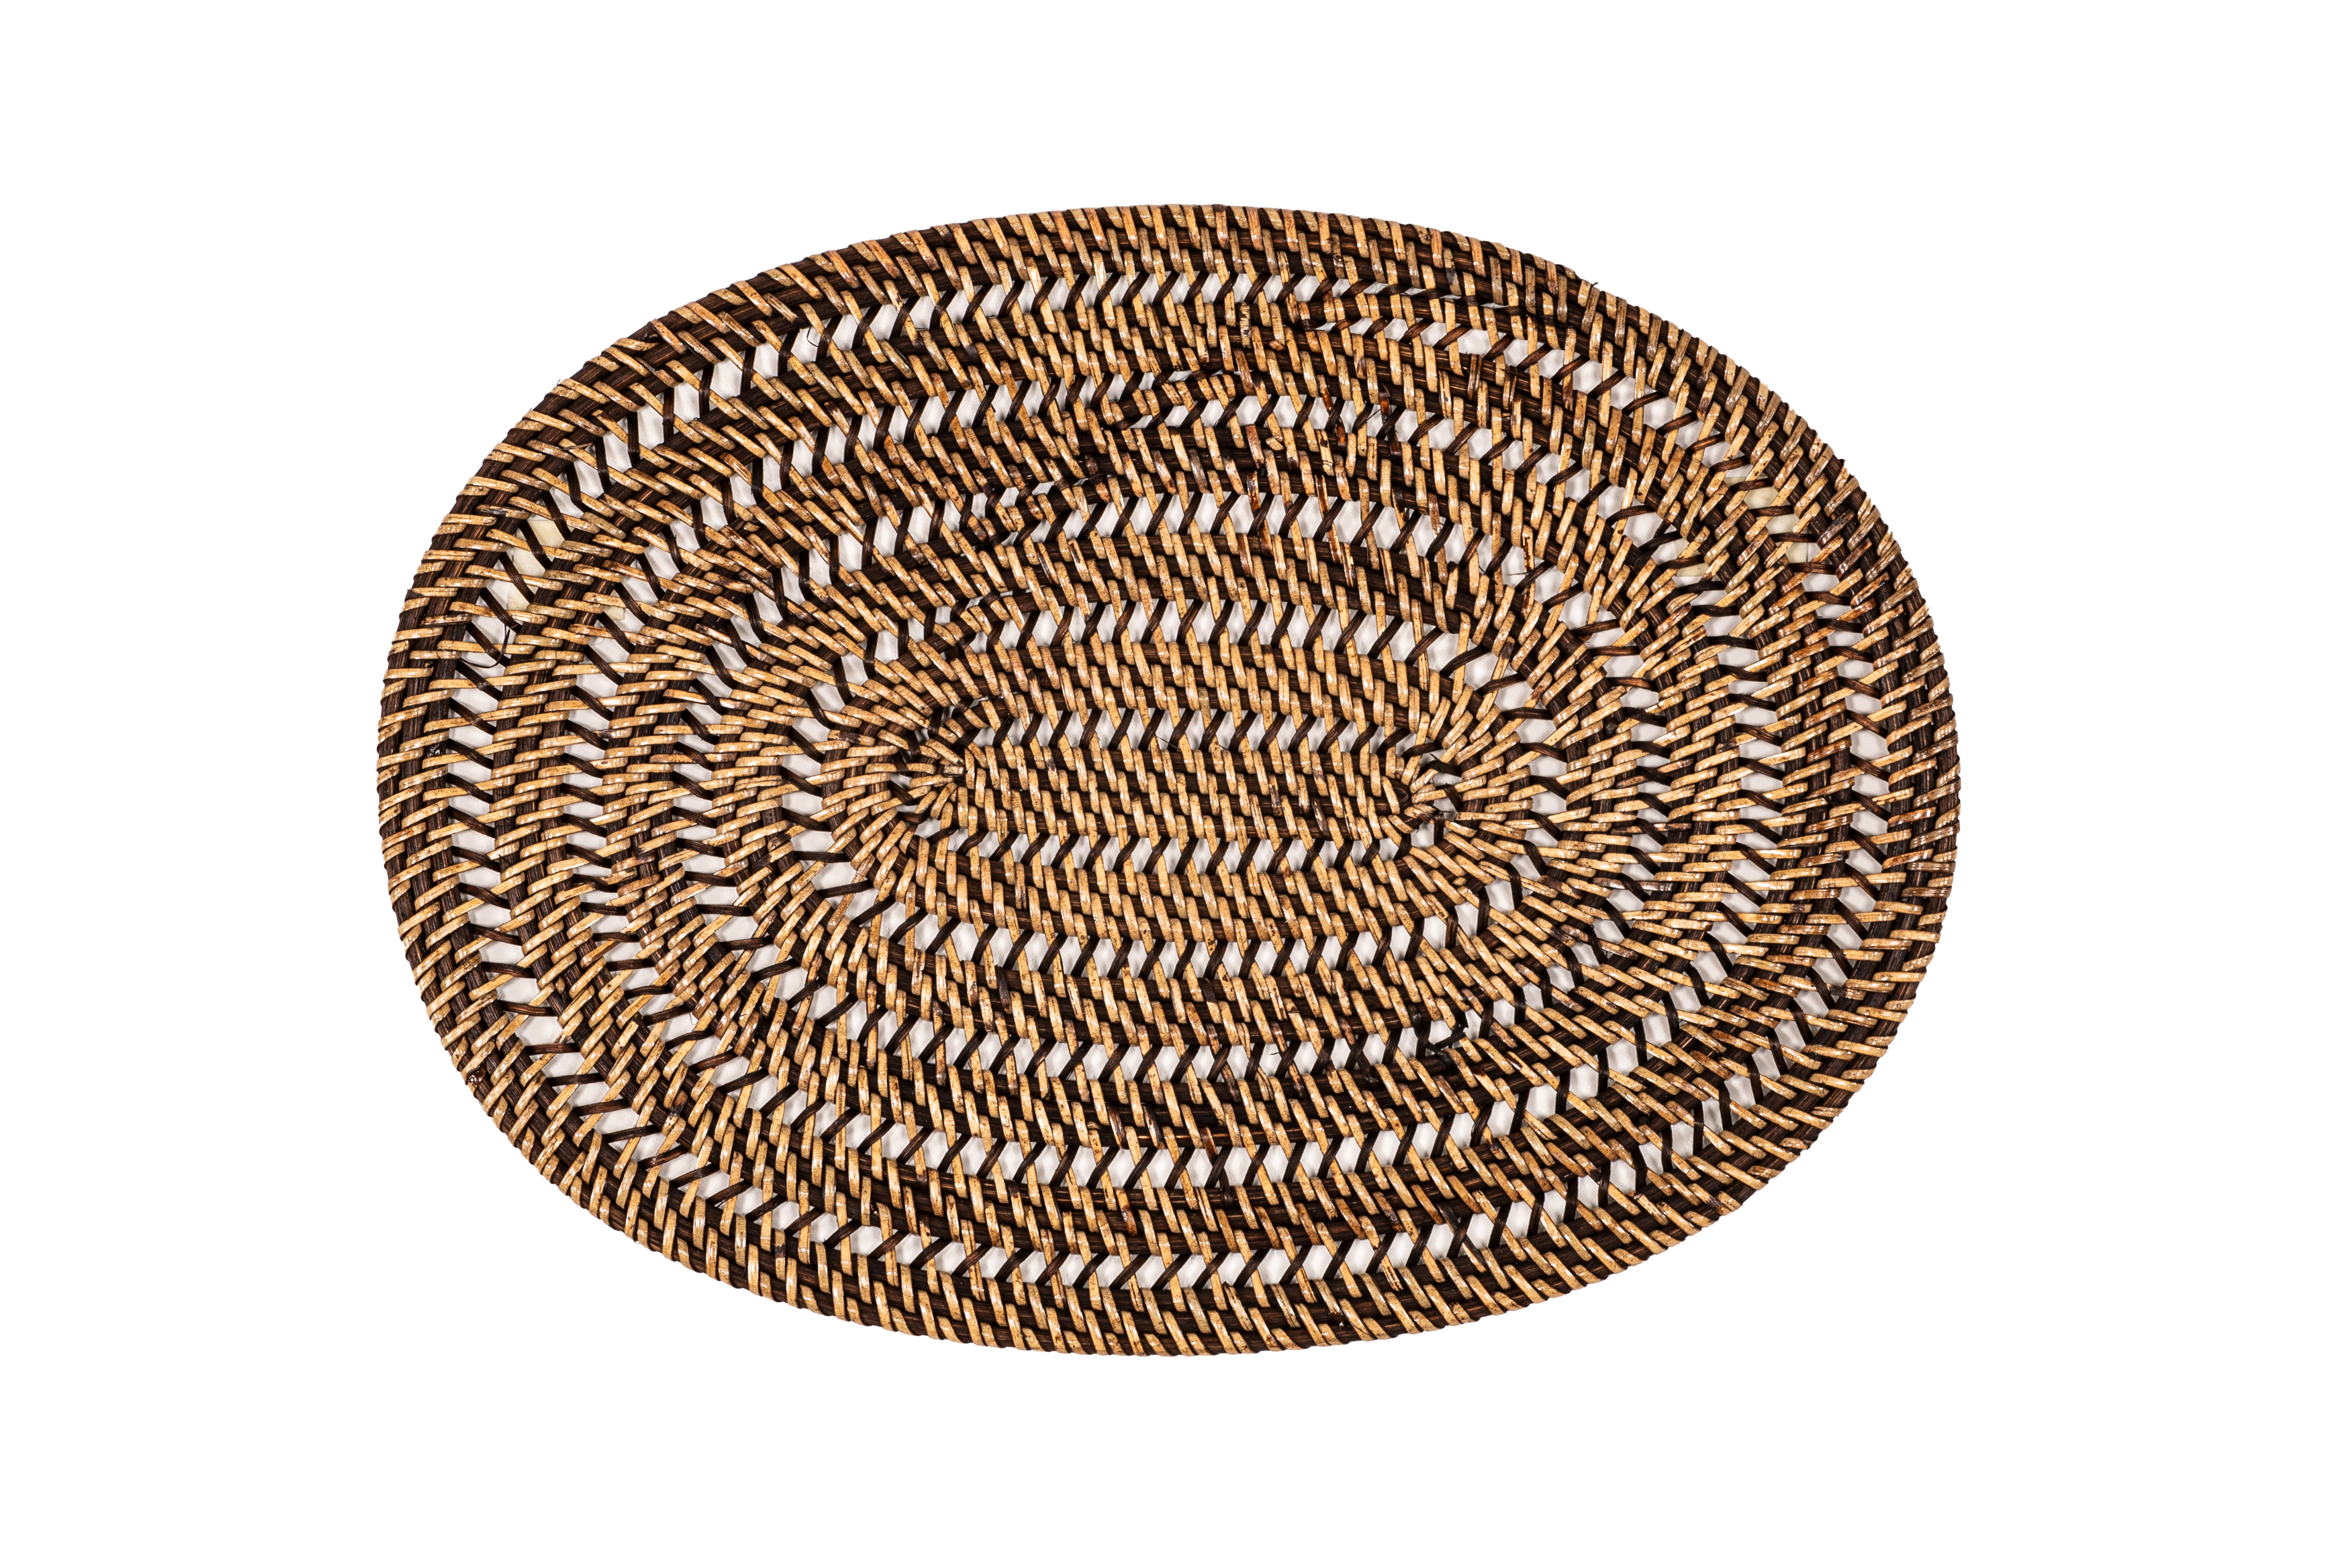 Placemat rattan 30x40 cm - oval, SPIRAL, donkerbruin